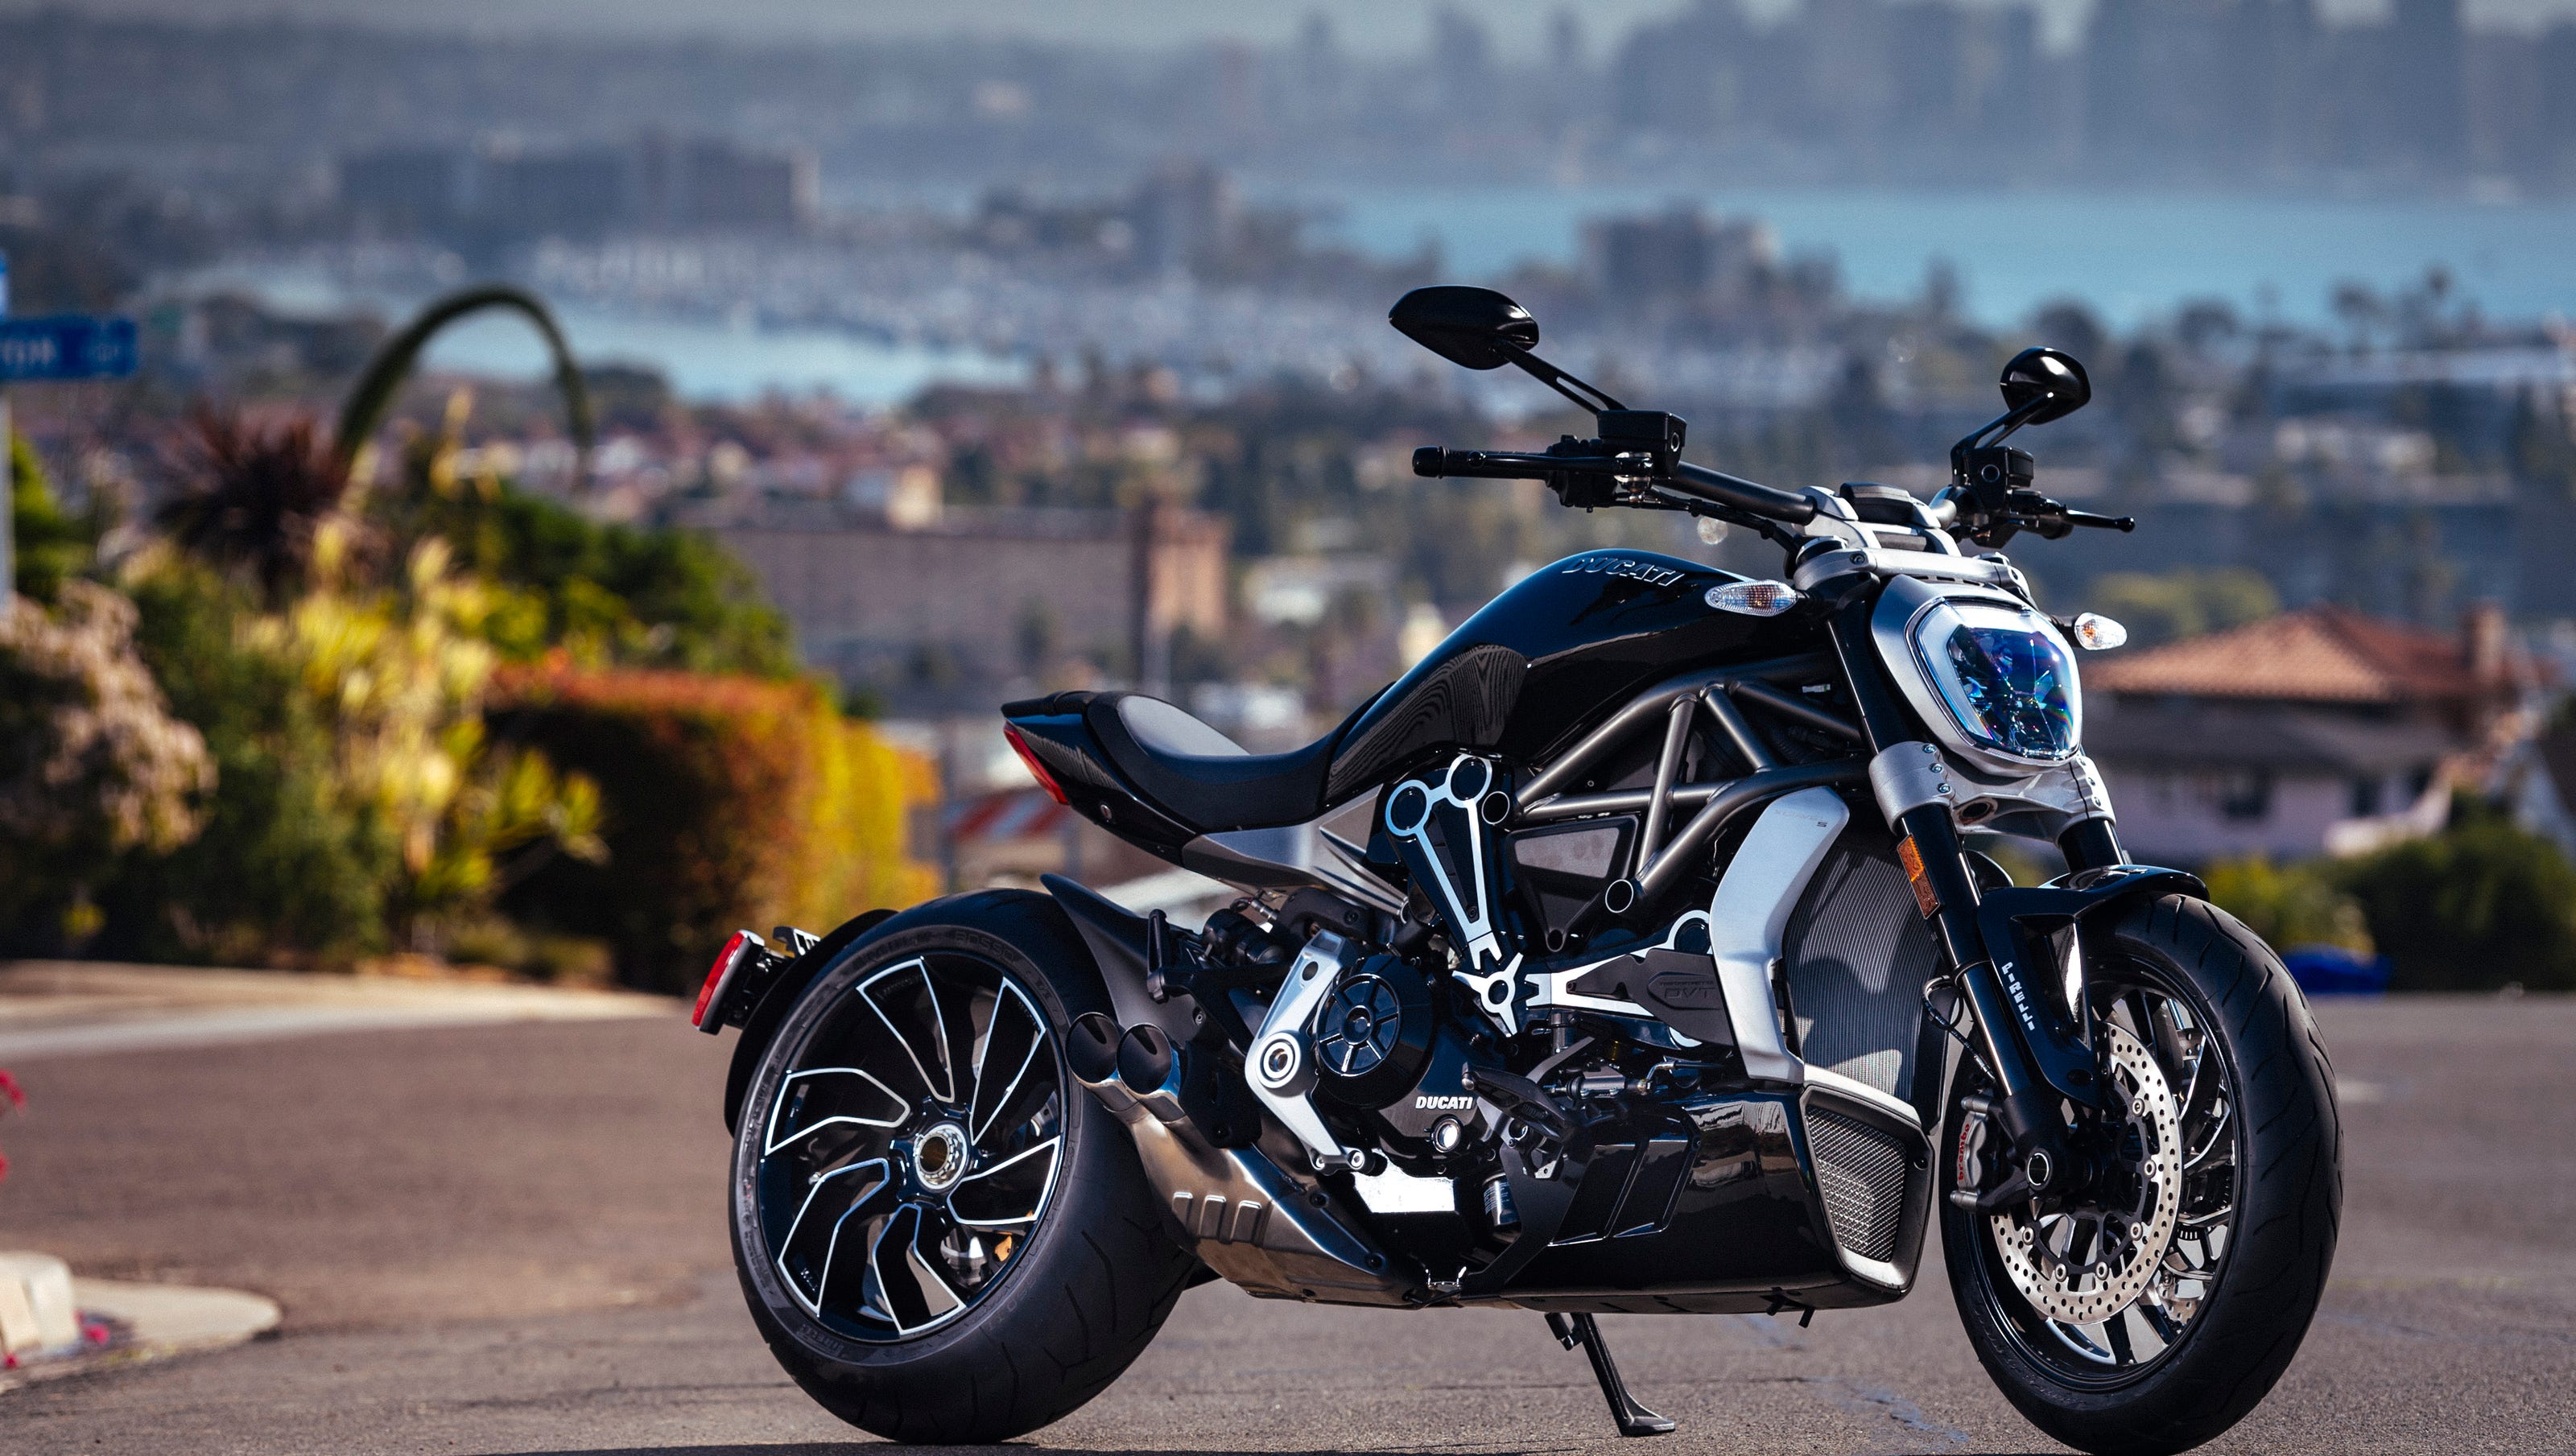 Motorcycle review: Ducati XDiavel is both a cruiser and sport bike